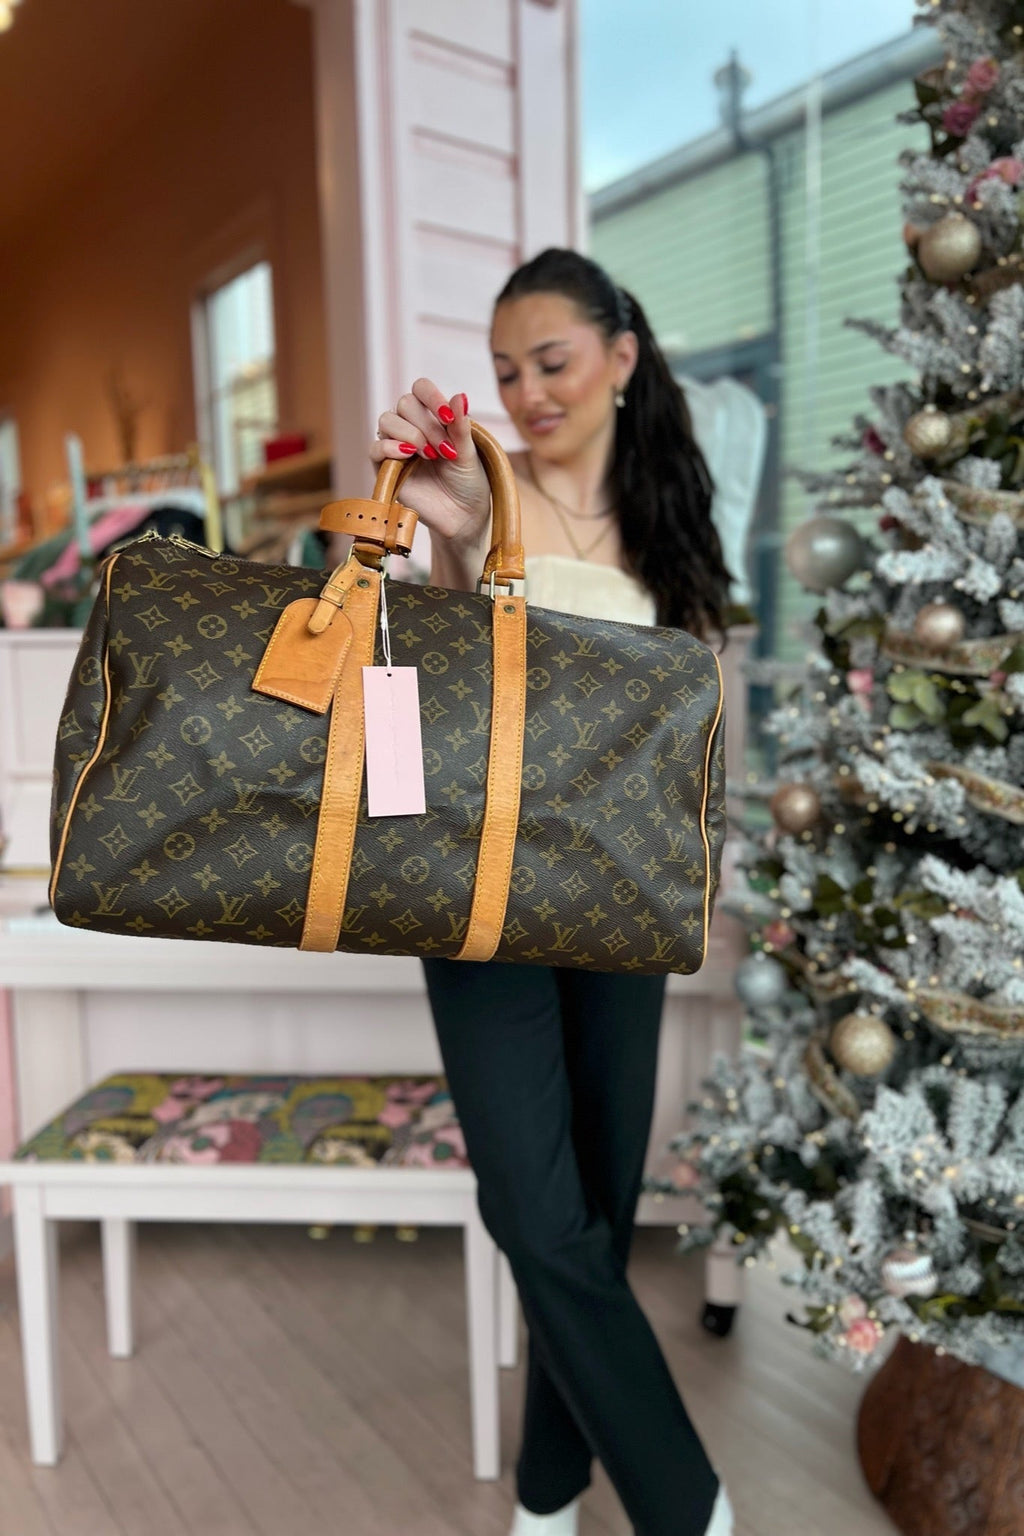 LOUIS VUITTON AUTHENTIC MONOGRAM GAME ON BANDOULIERE KEEPALL 45